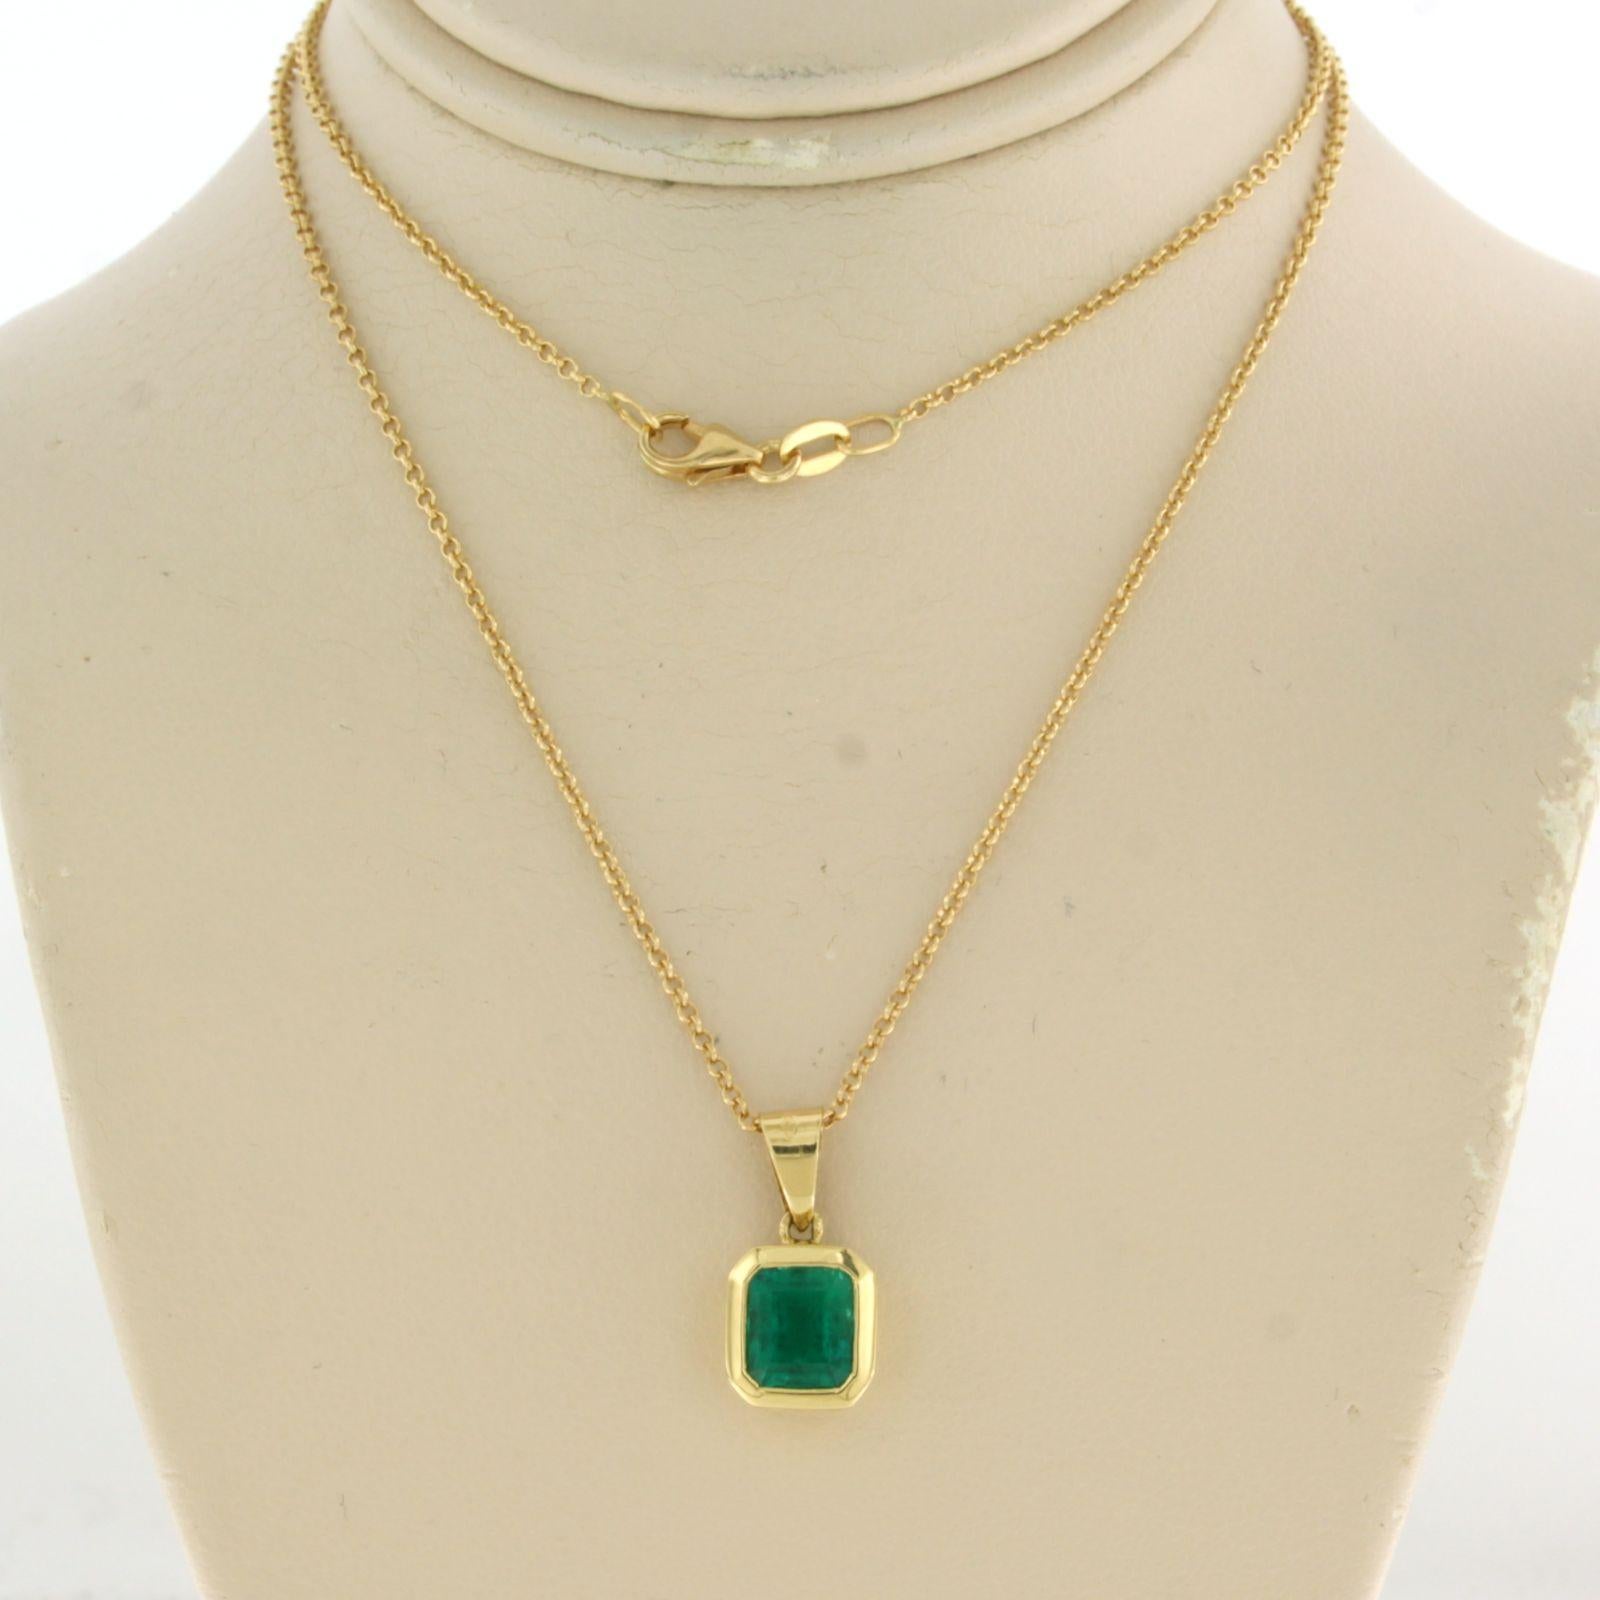 18k yellow gold necklace with pendant set with emerald 0.85 ct - 45cm long

Detailed description

the length of the necklace is 45 cm long by 0.7 mm wide
 
the pendant is 1.5 cm high and 8.0 mm wide

total weight: 4.1 grams

occupied with:

- 1 x